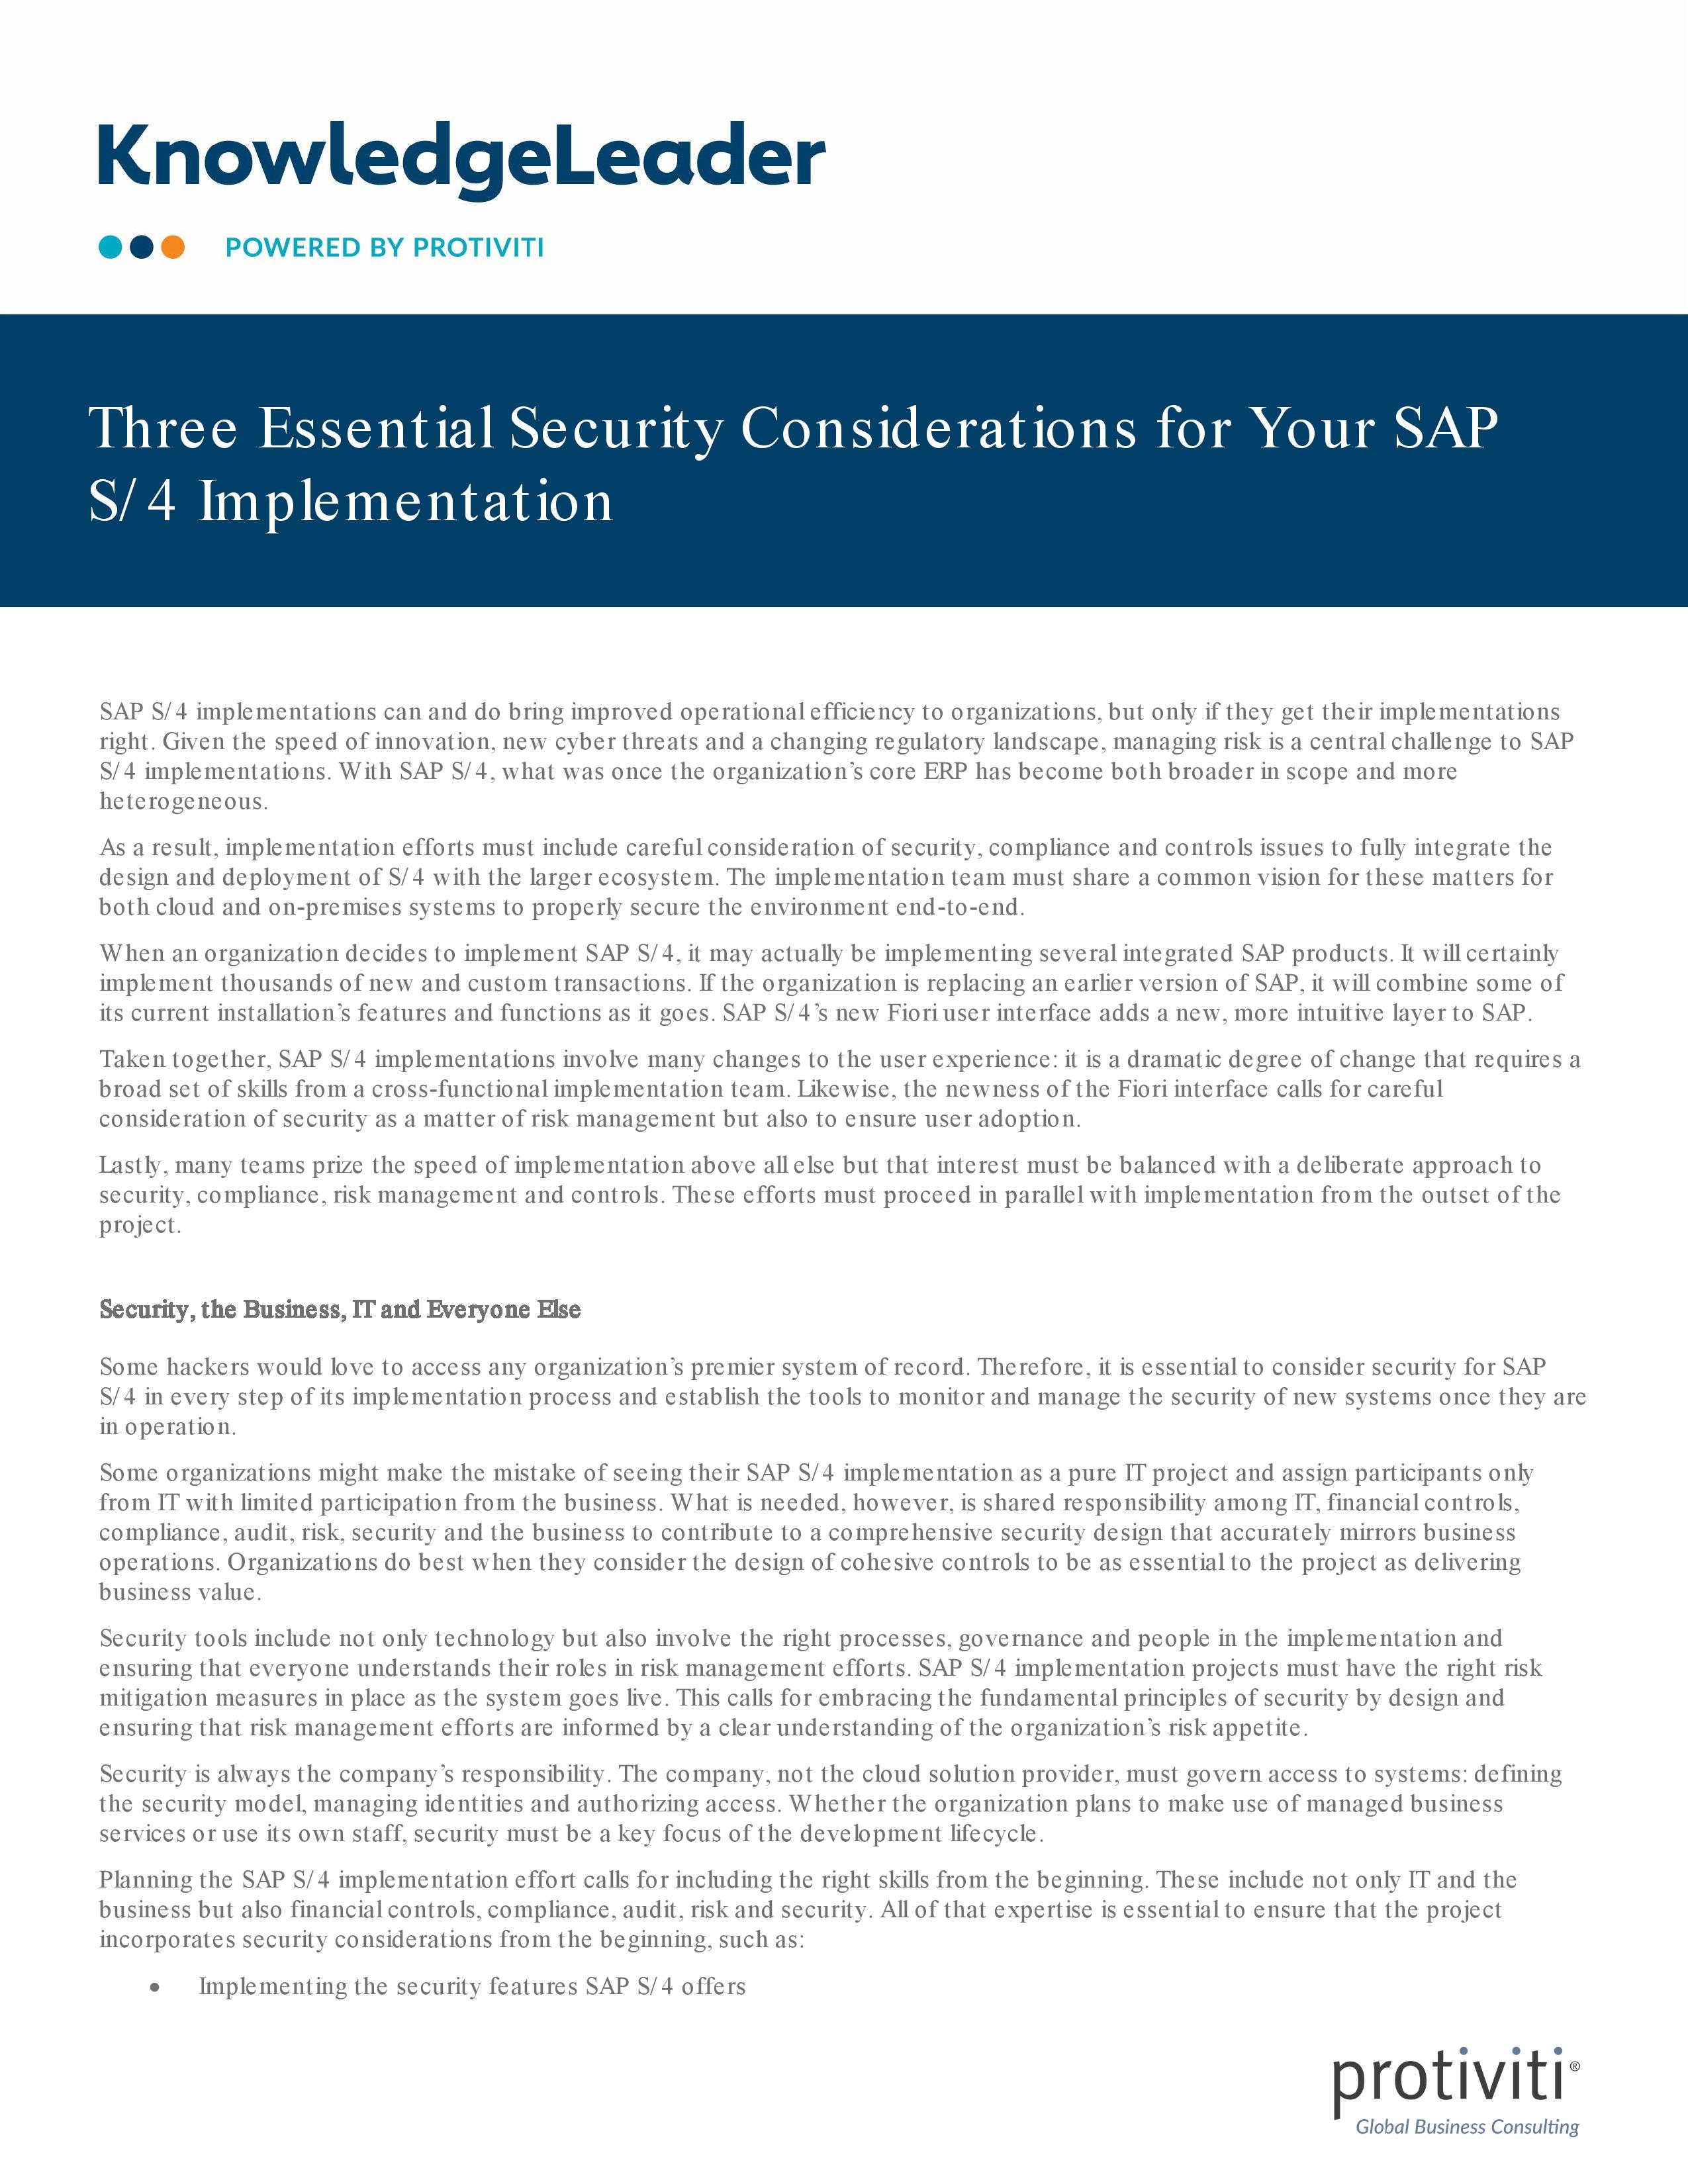 Screenshot of the first page of Three Essential Security Considerations for Your SAP S4 Implementation